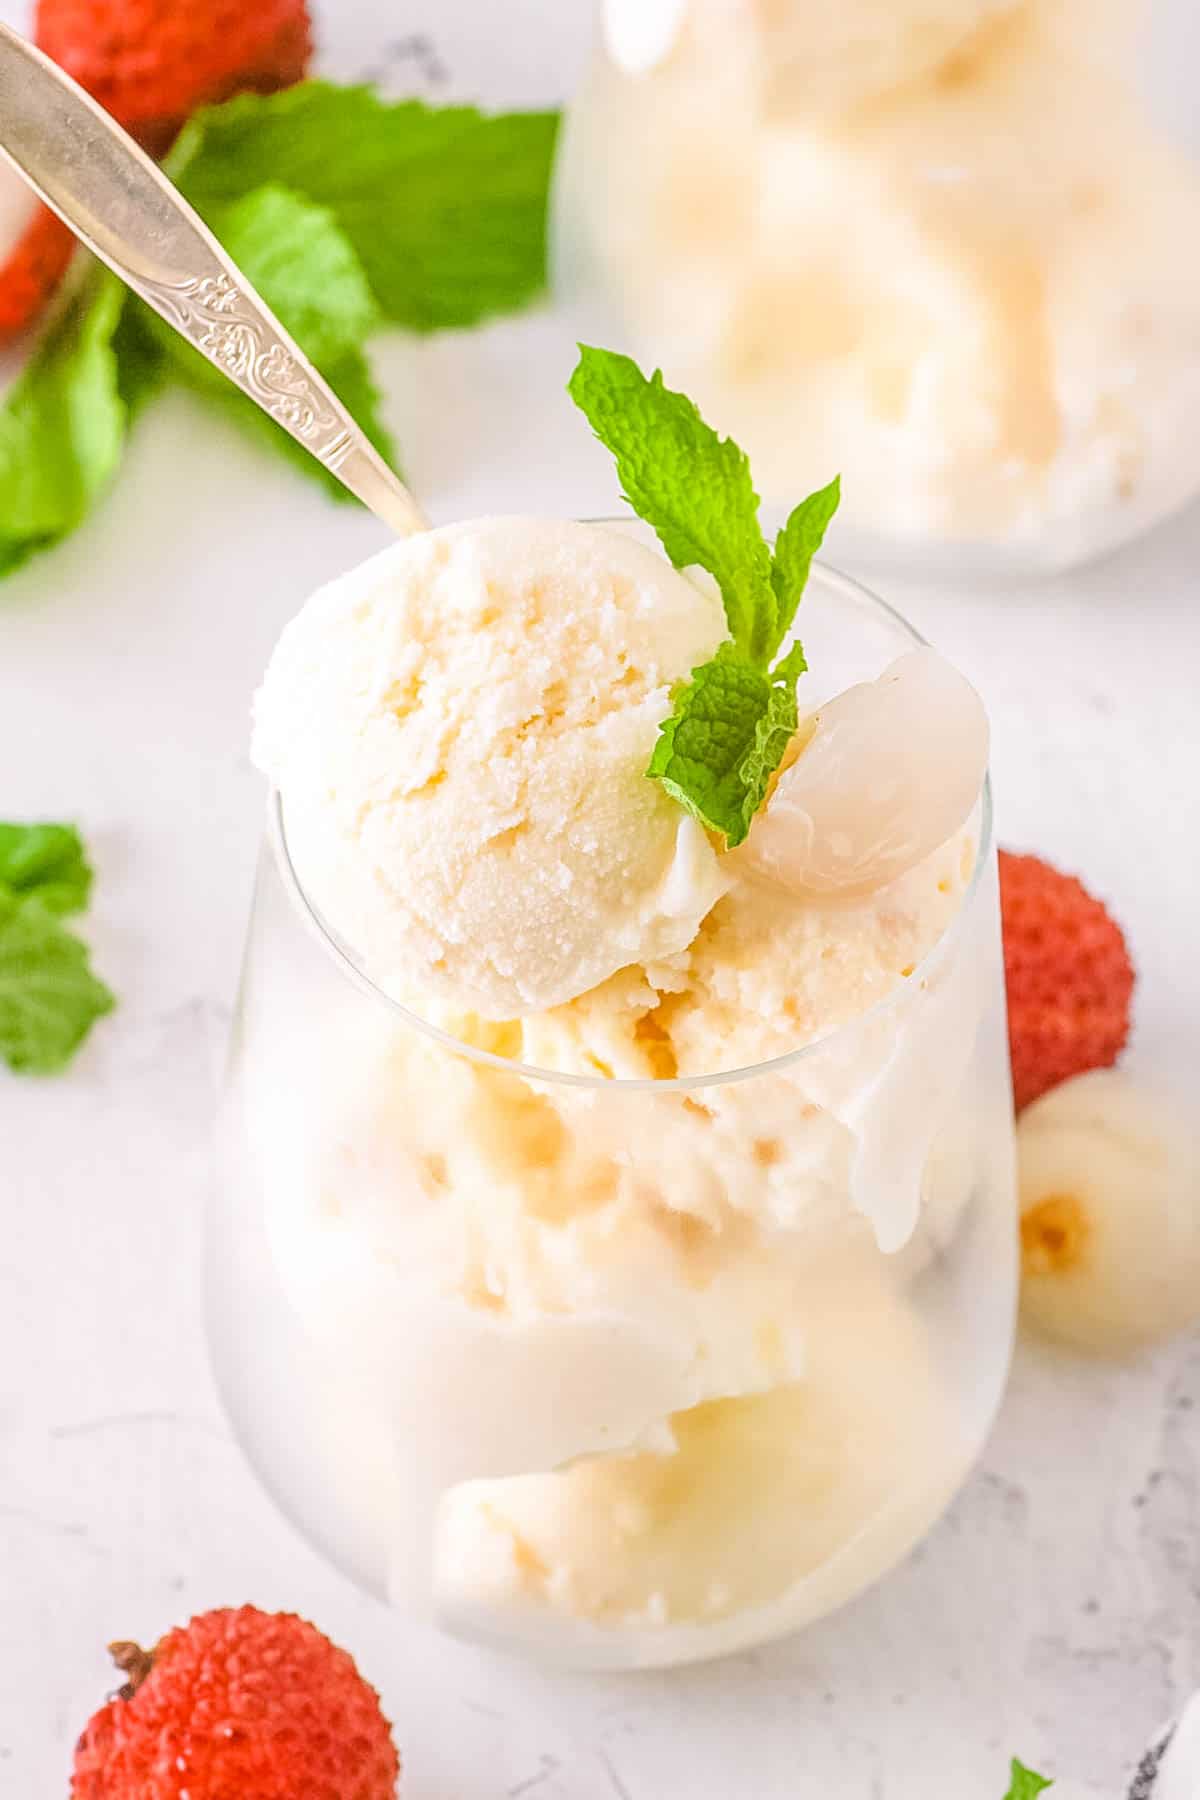 Creamy homemade lychee ice cream served in a glass with a mint garnish.